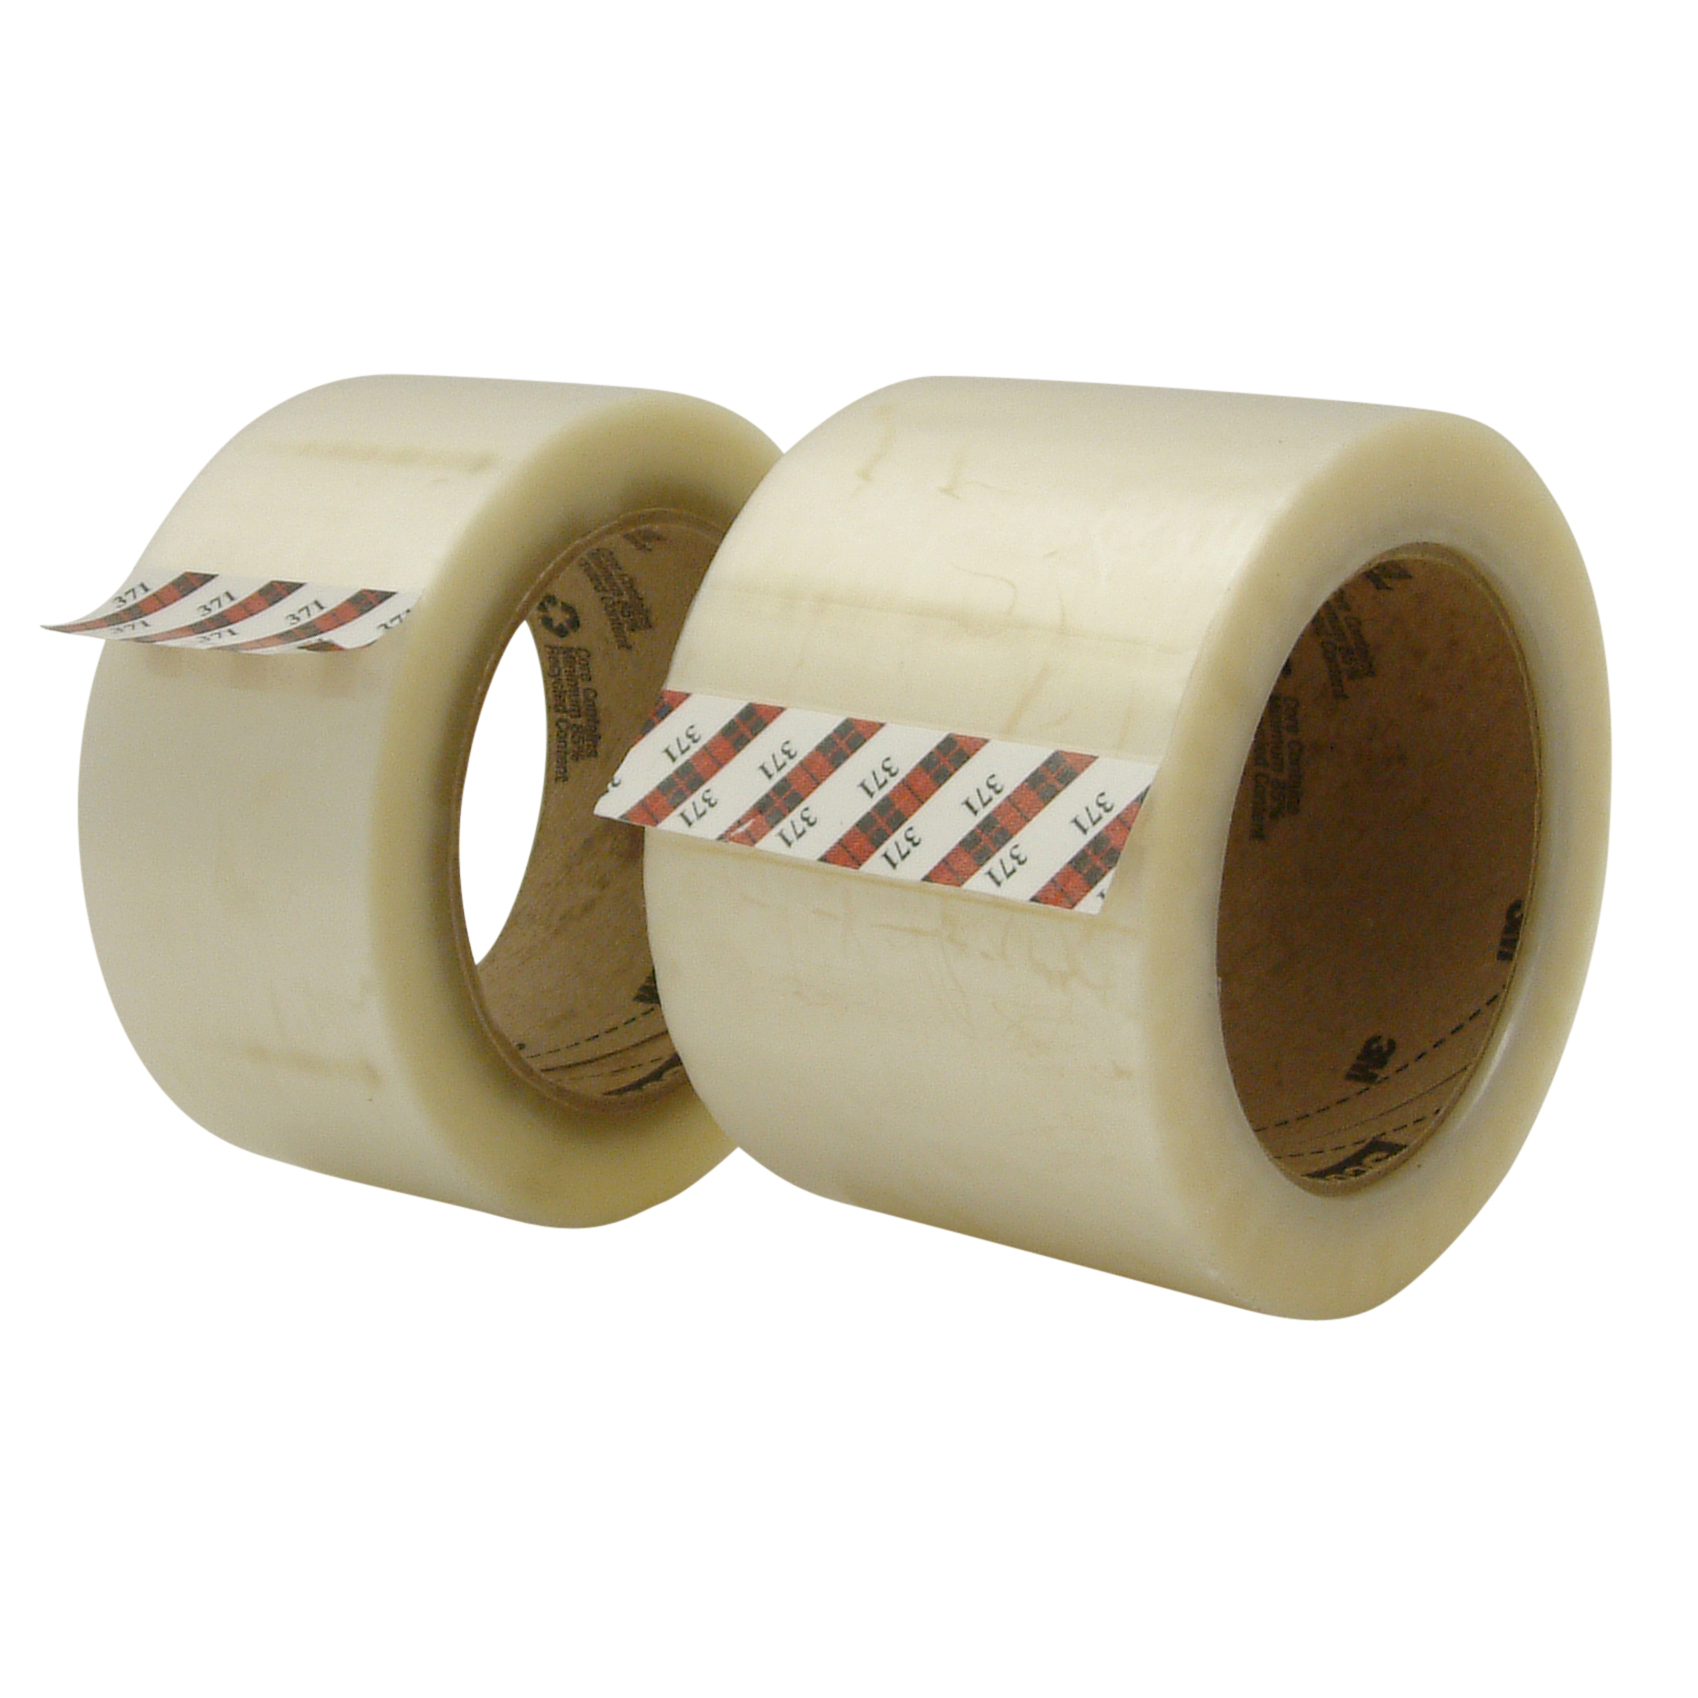 3M™ 371 Transparent Packaging Wrapping Tape 25mm X 66 Metres long 6 OR 12 ROLLS 